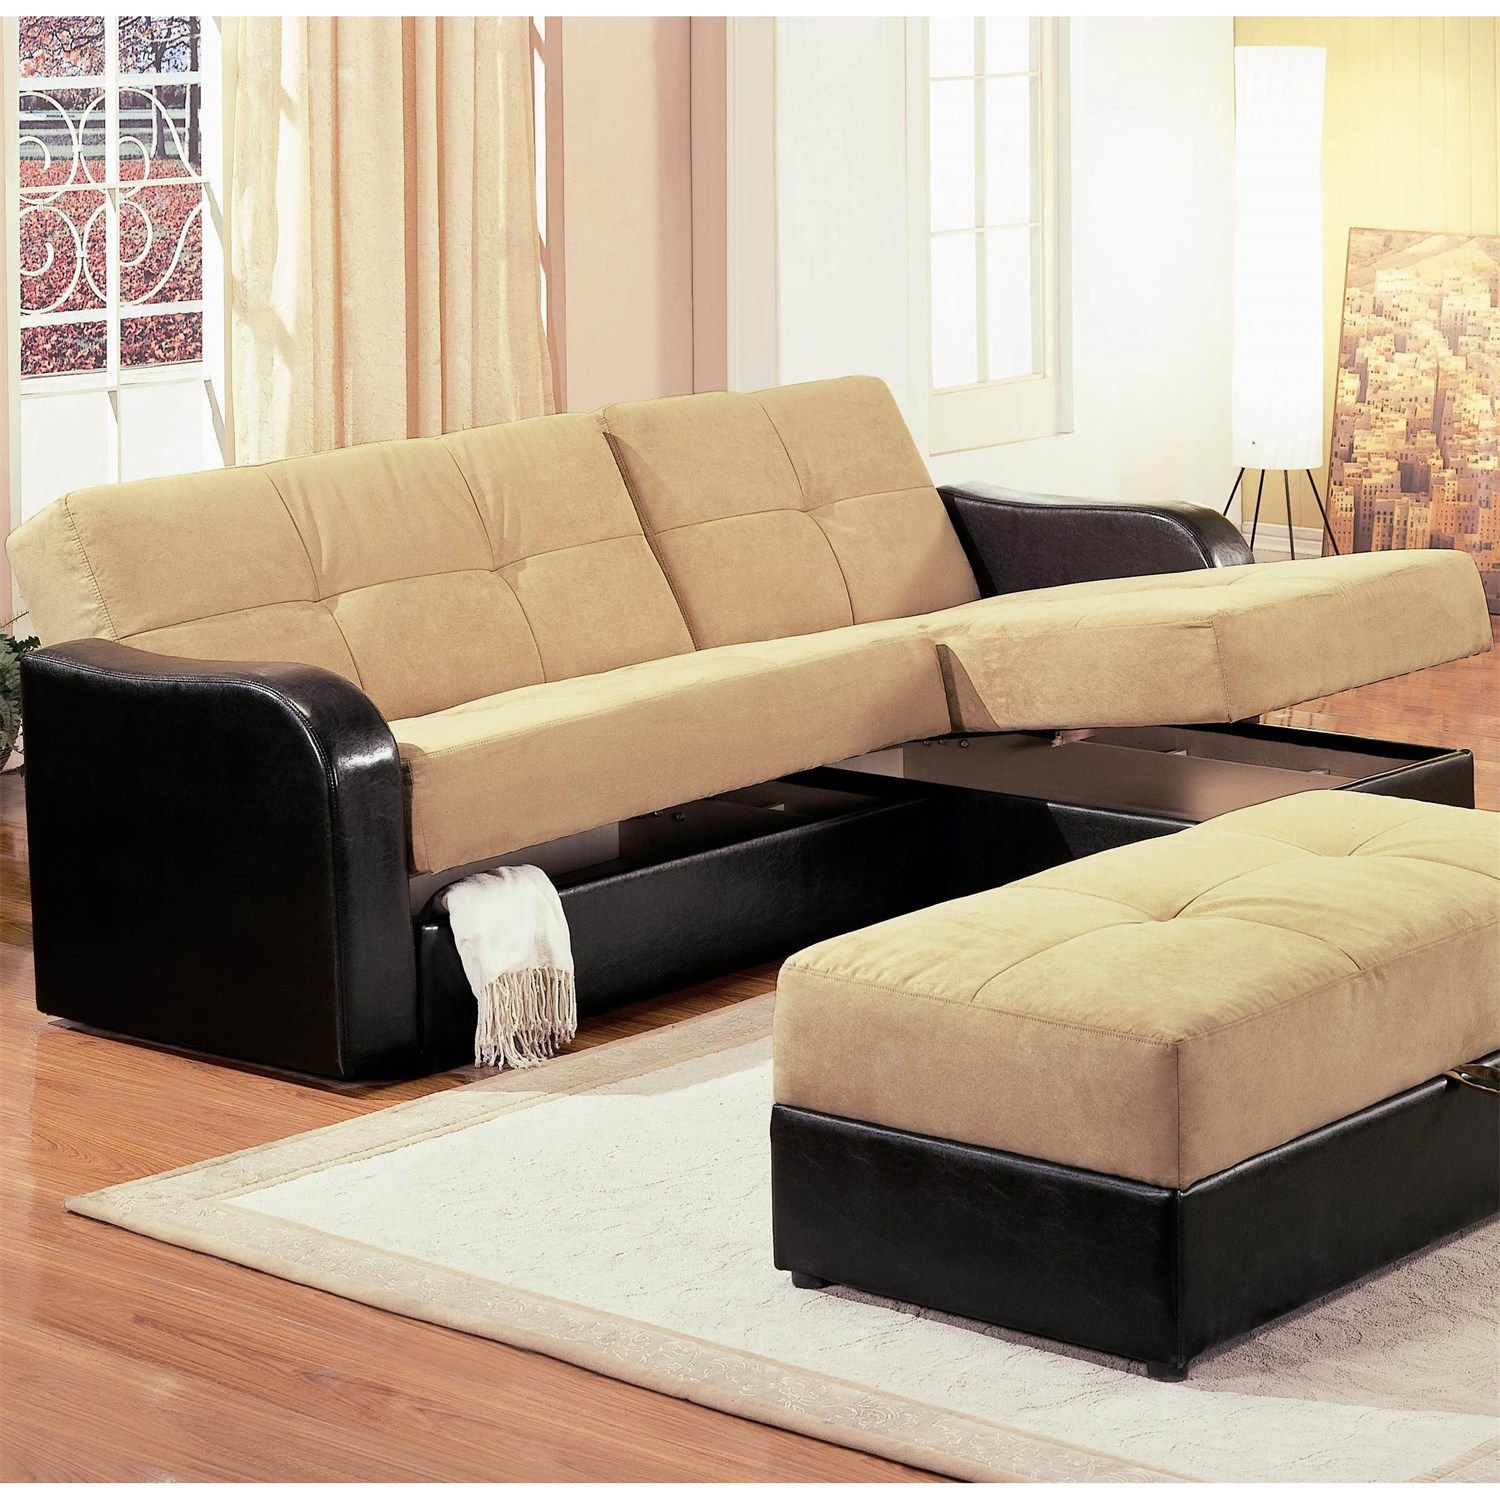 Sectional sofas with storage